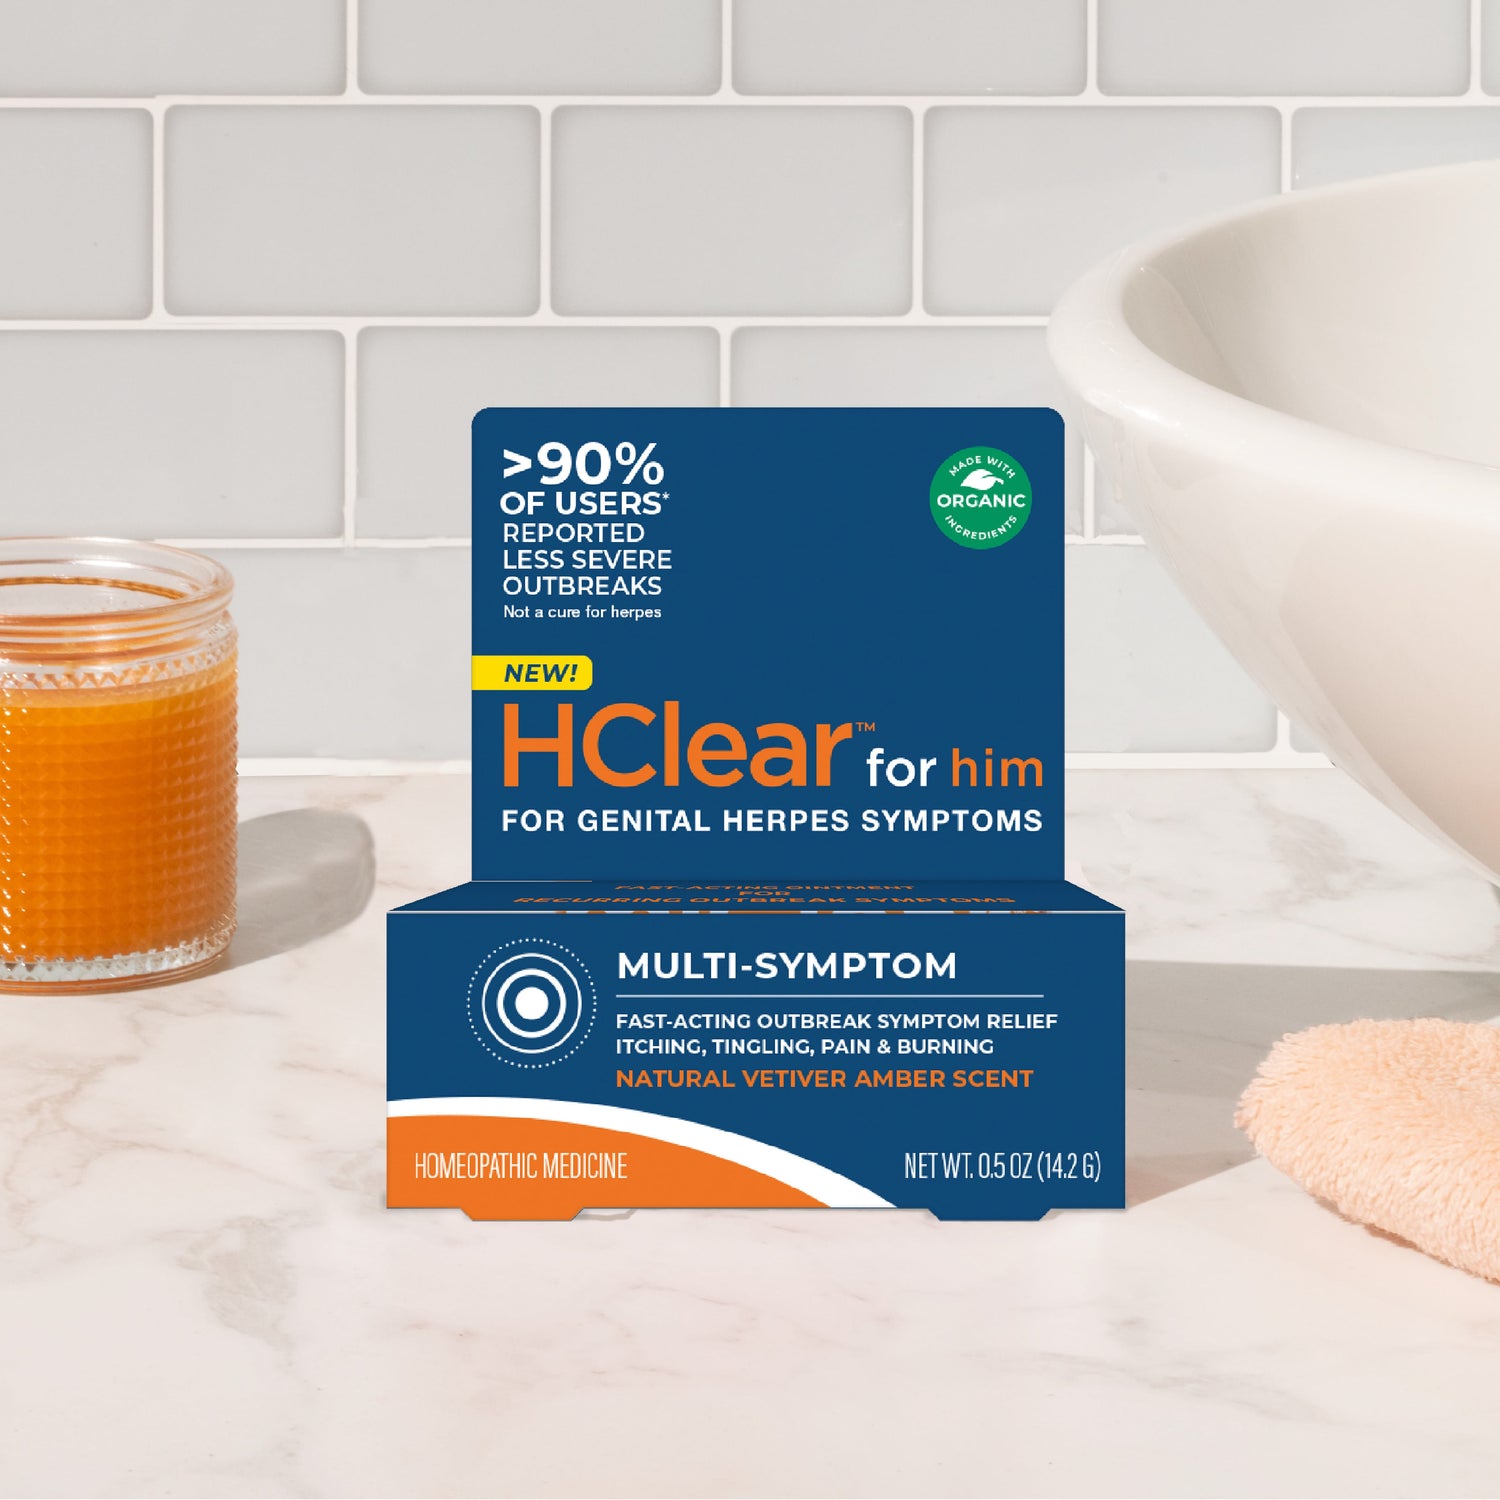 Need a genital herpes cream for men? Try FemiClear topical herpes ointment a male genital herpes symptom reliever.